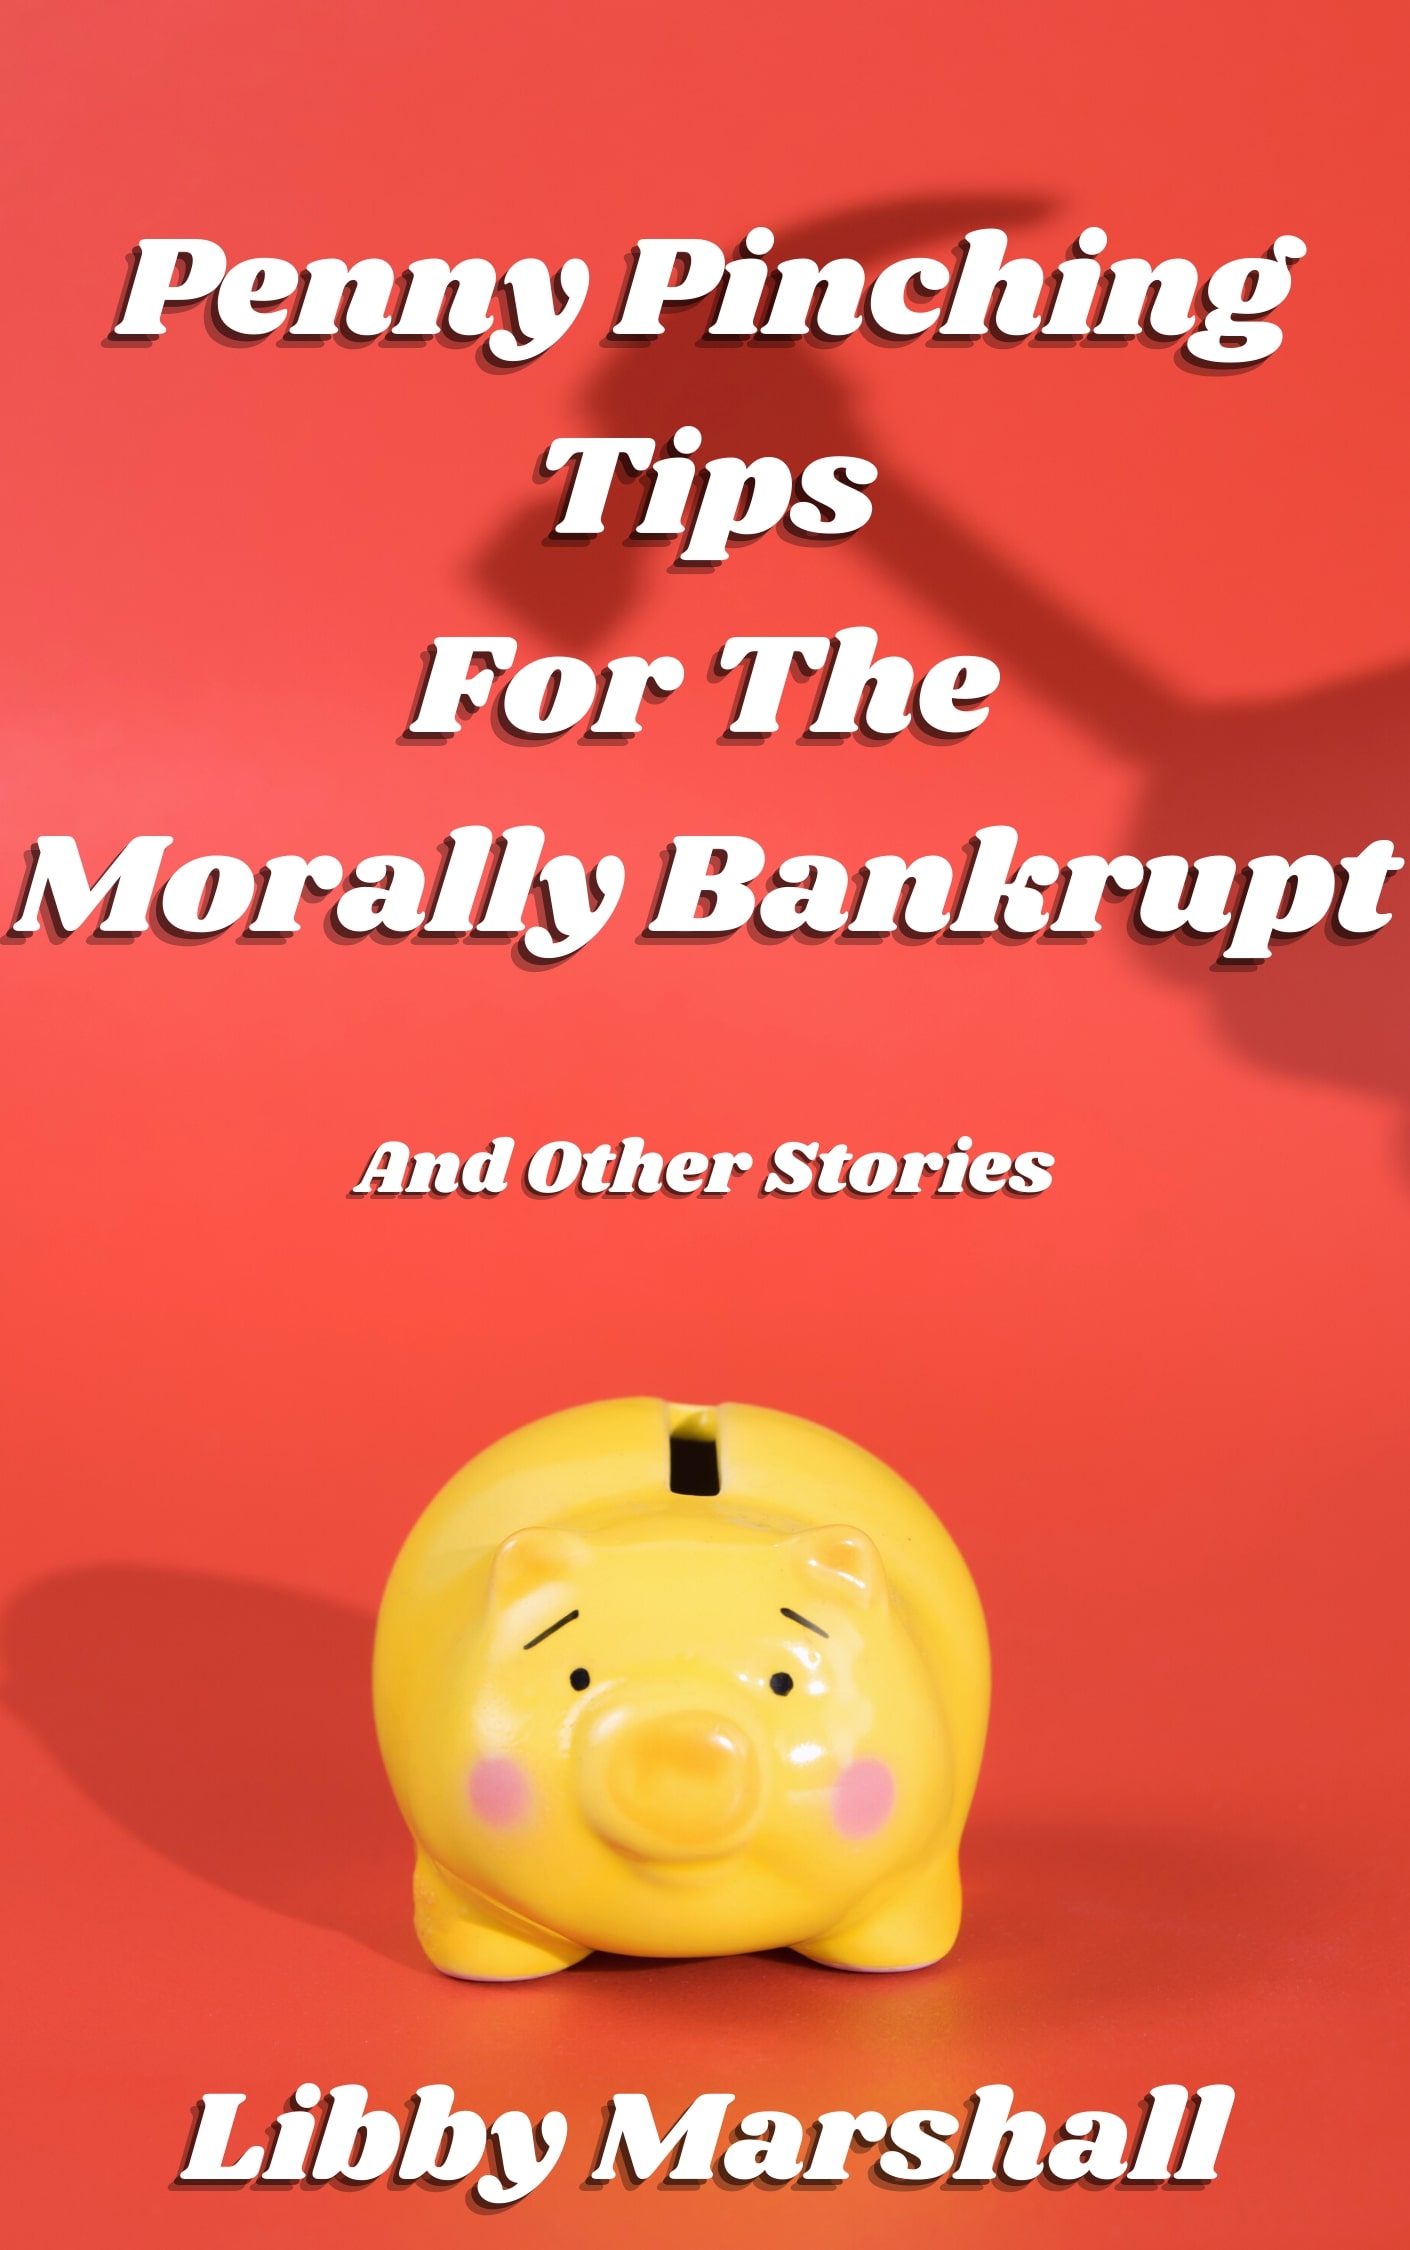 FREE: Penny Pinching Tips for the Morally Bankrupt by Libby Marshall